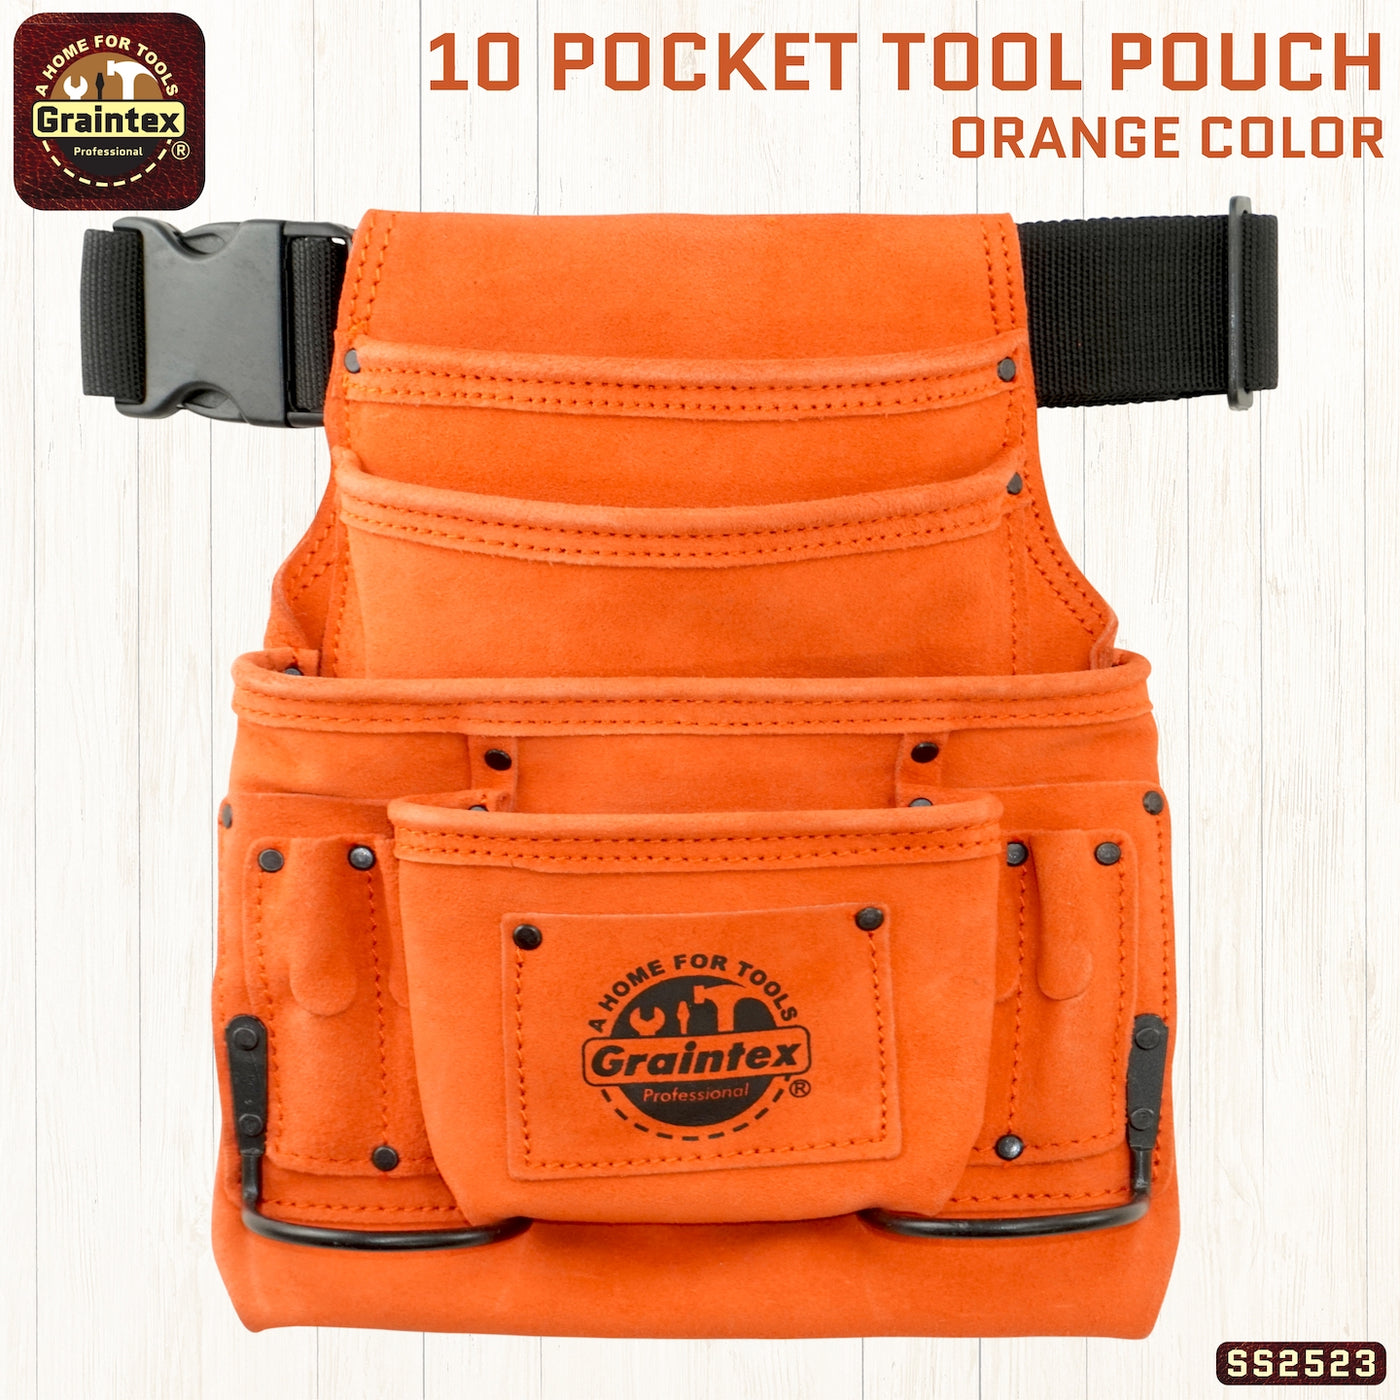 SS2523 :: 10 Pocket Nail & Tool Pouch Orange Color Suede Leather with Belt